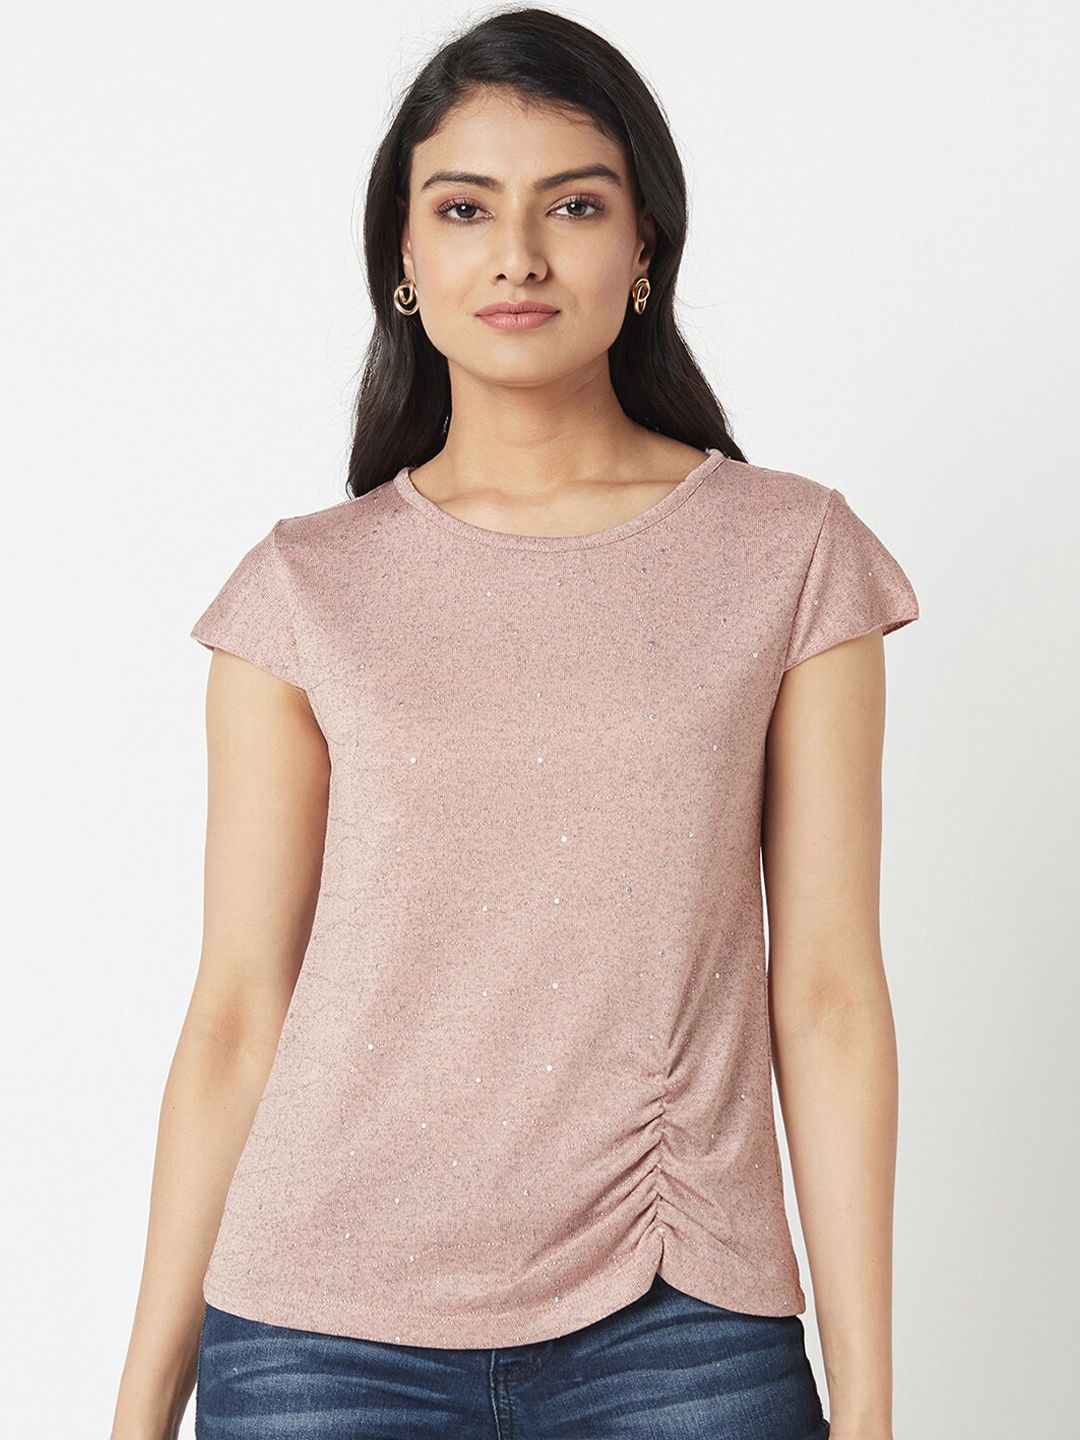 Miss Grace Women Pink Bling & Sparkly Top Price in India